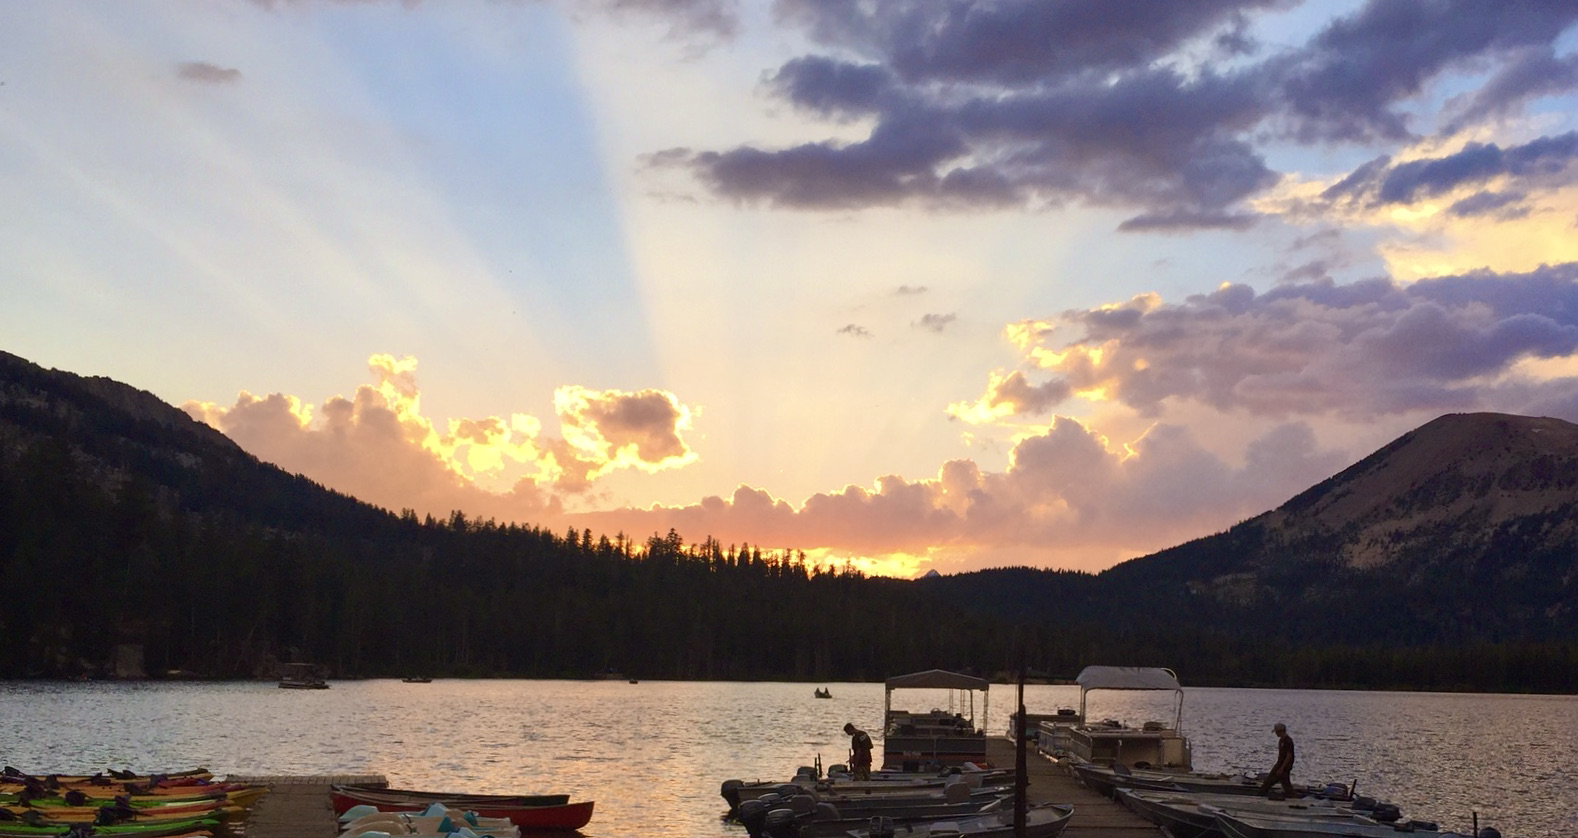 Photo of a sunset with sun rays coming out over the mountains withe boats on the dock in the foreground